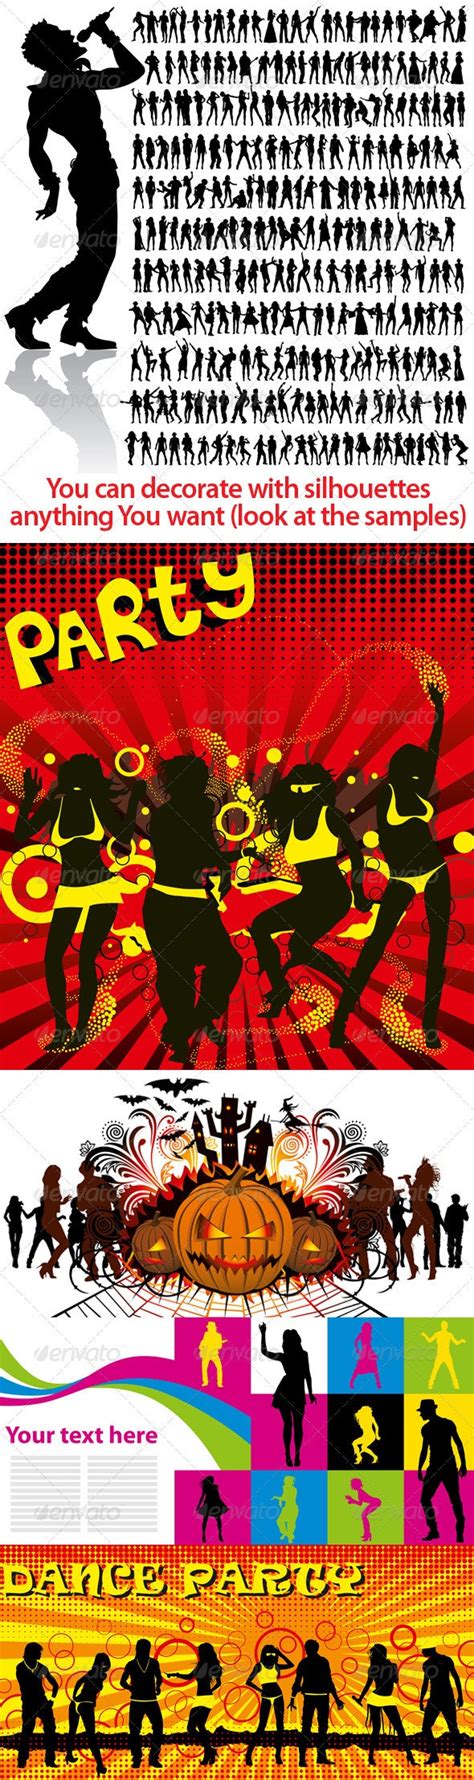 Dancing And Singing Peoples Silhouettes Big Set By Leedsn Graphicriver